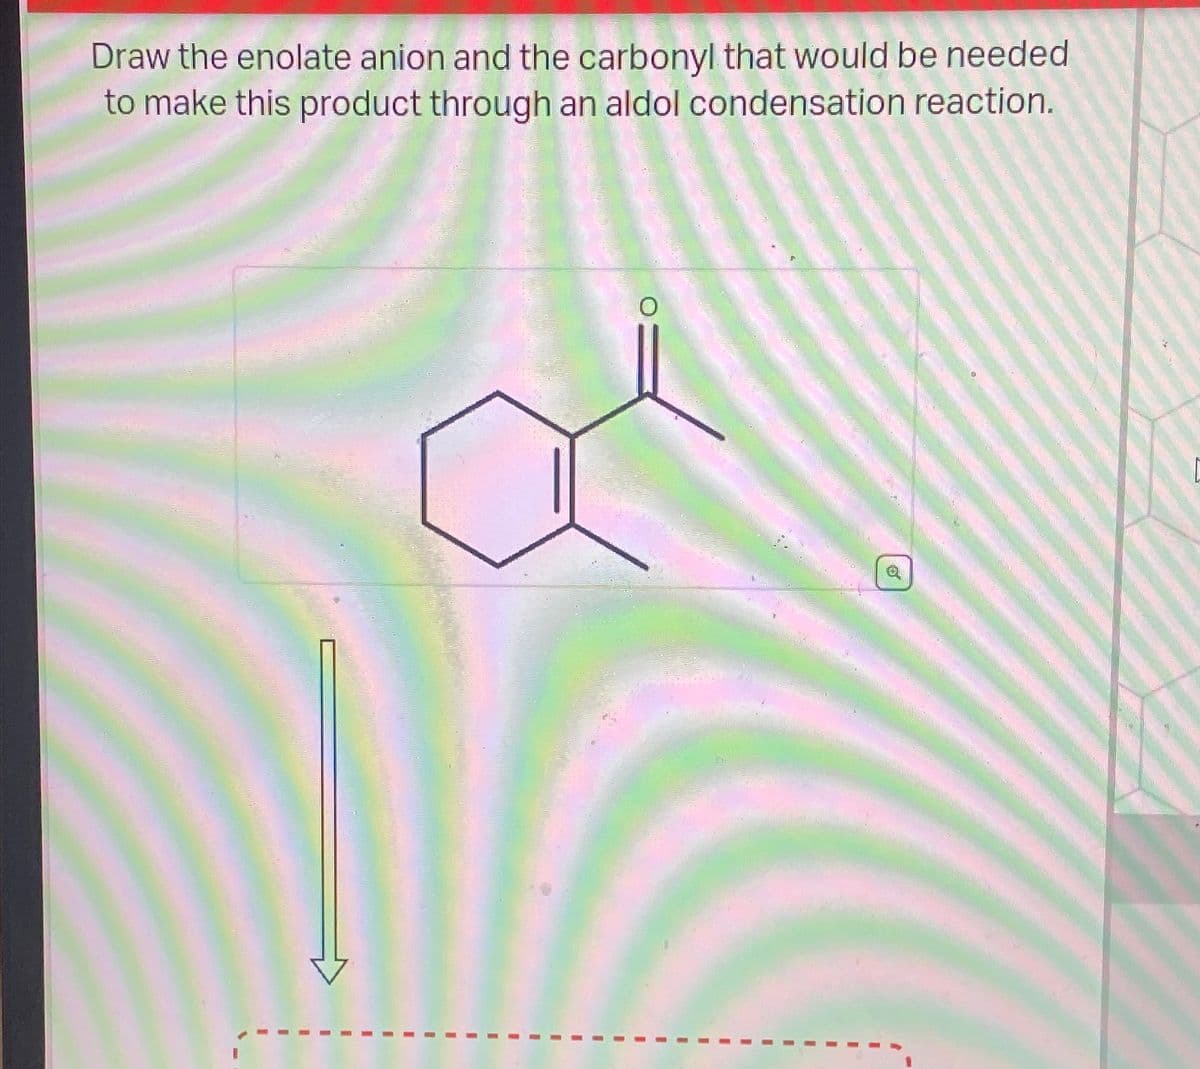 Draw the enolate anion and the carbonyl that would be needed
to make this product through an aldol condensation reaction.
0